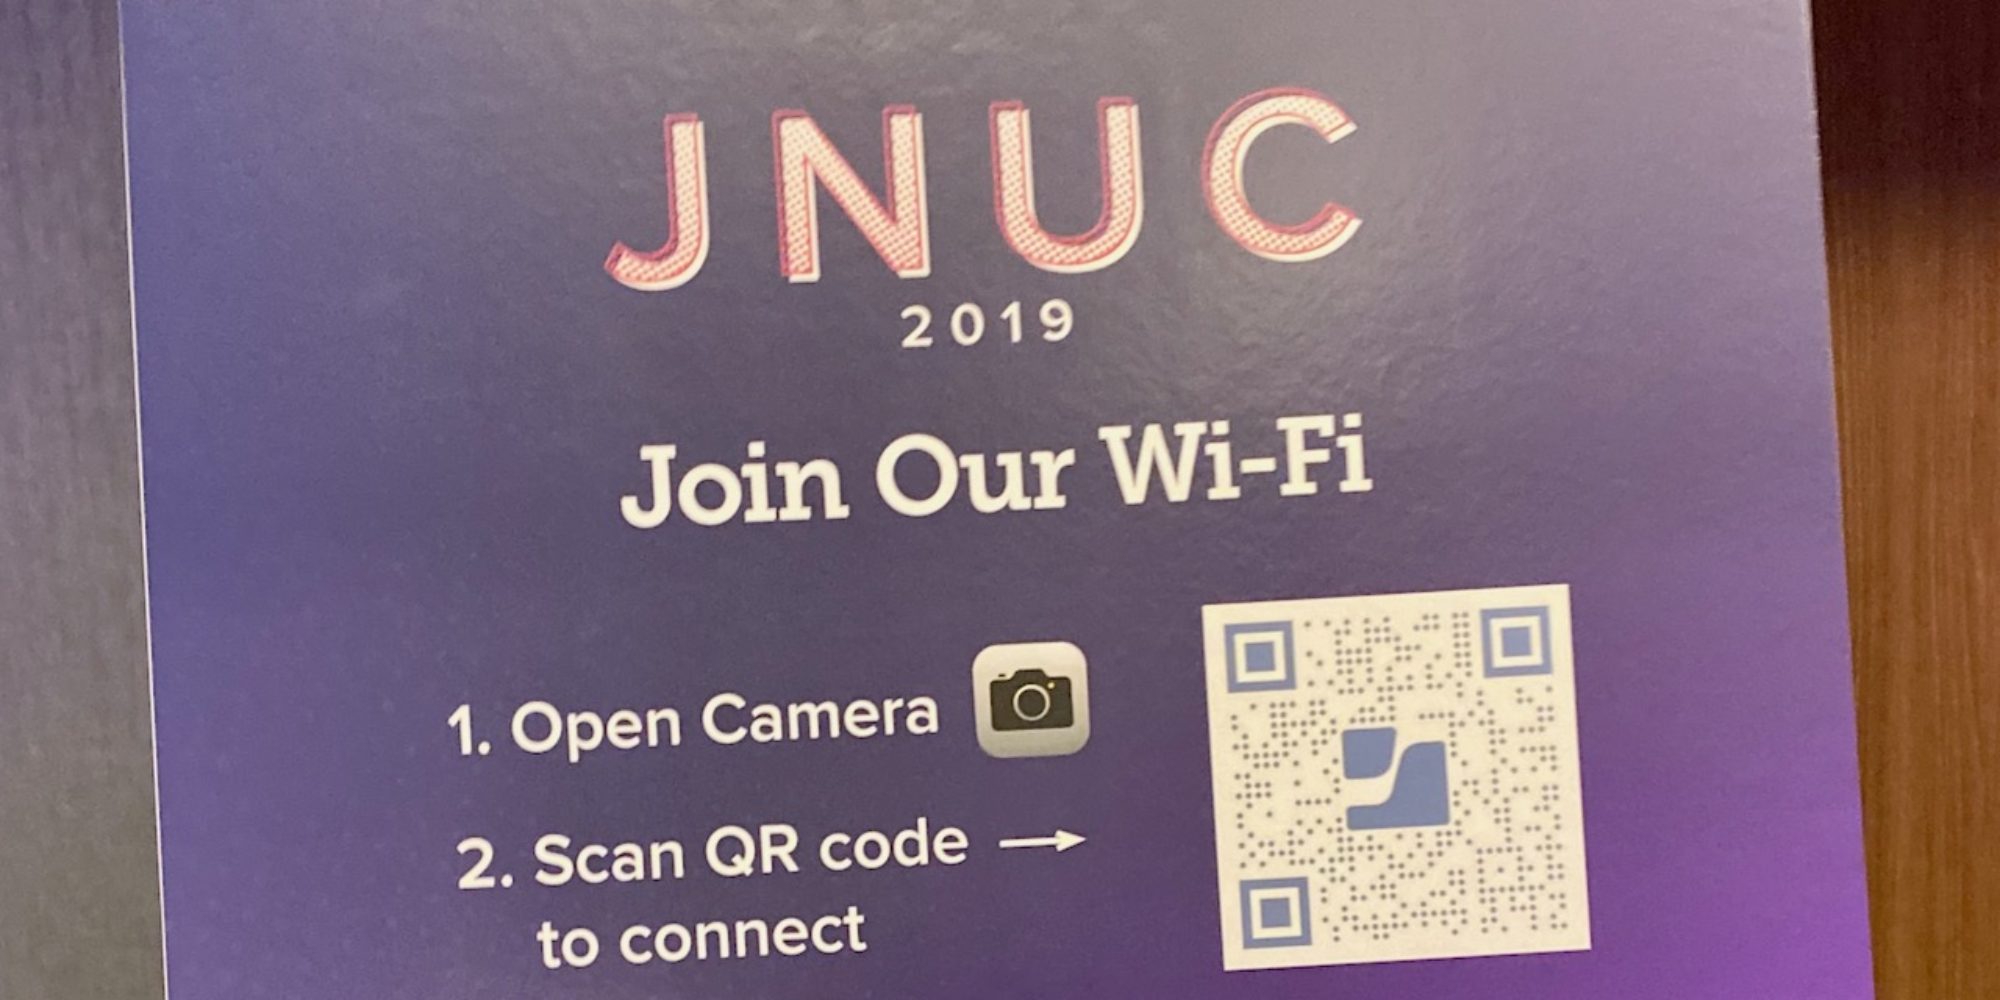 Make Joining Your Wi-Fi Network as Easy as Scanning a QR Code